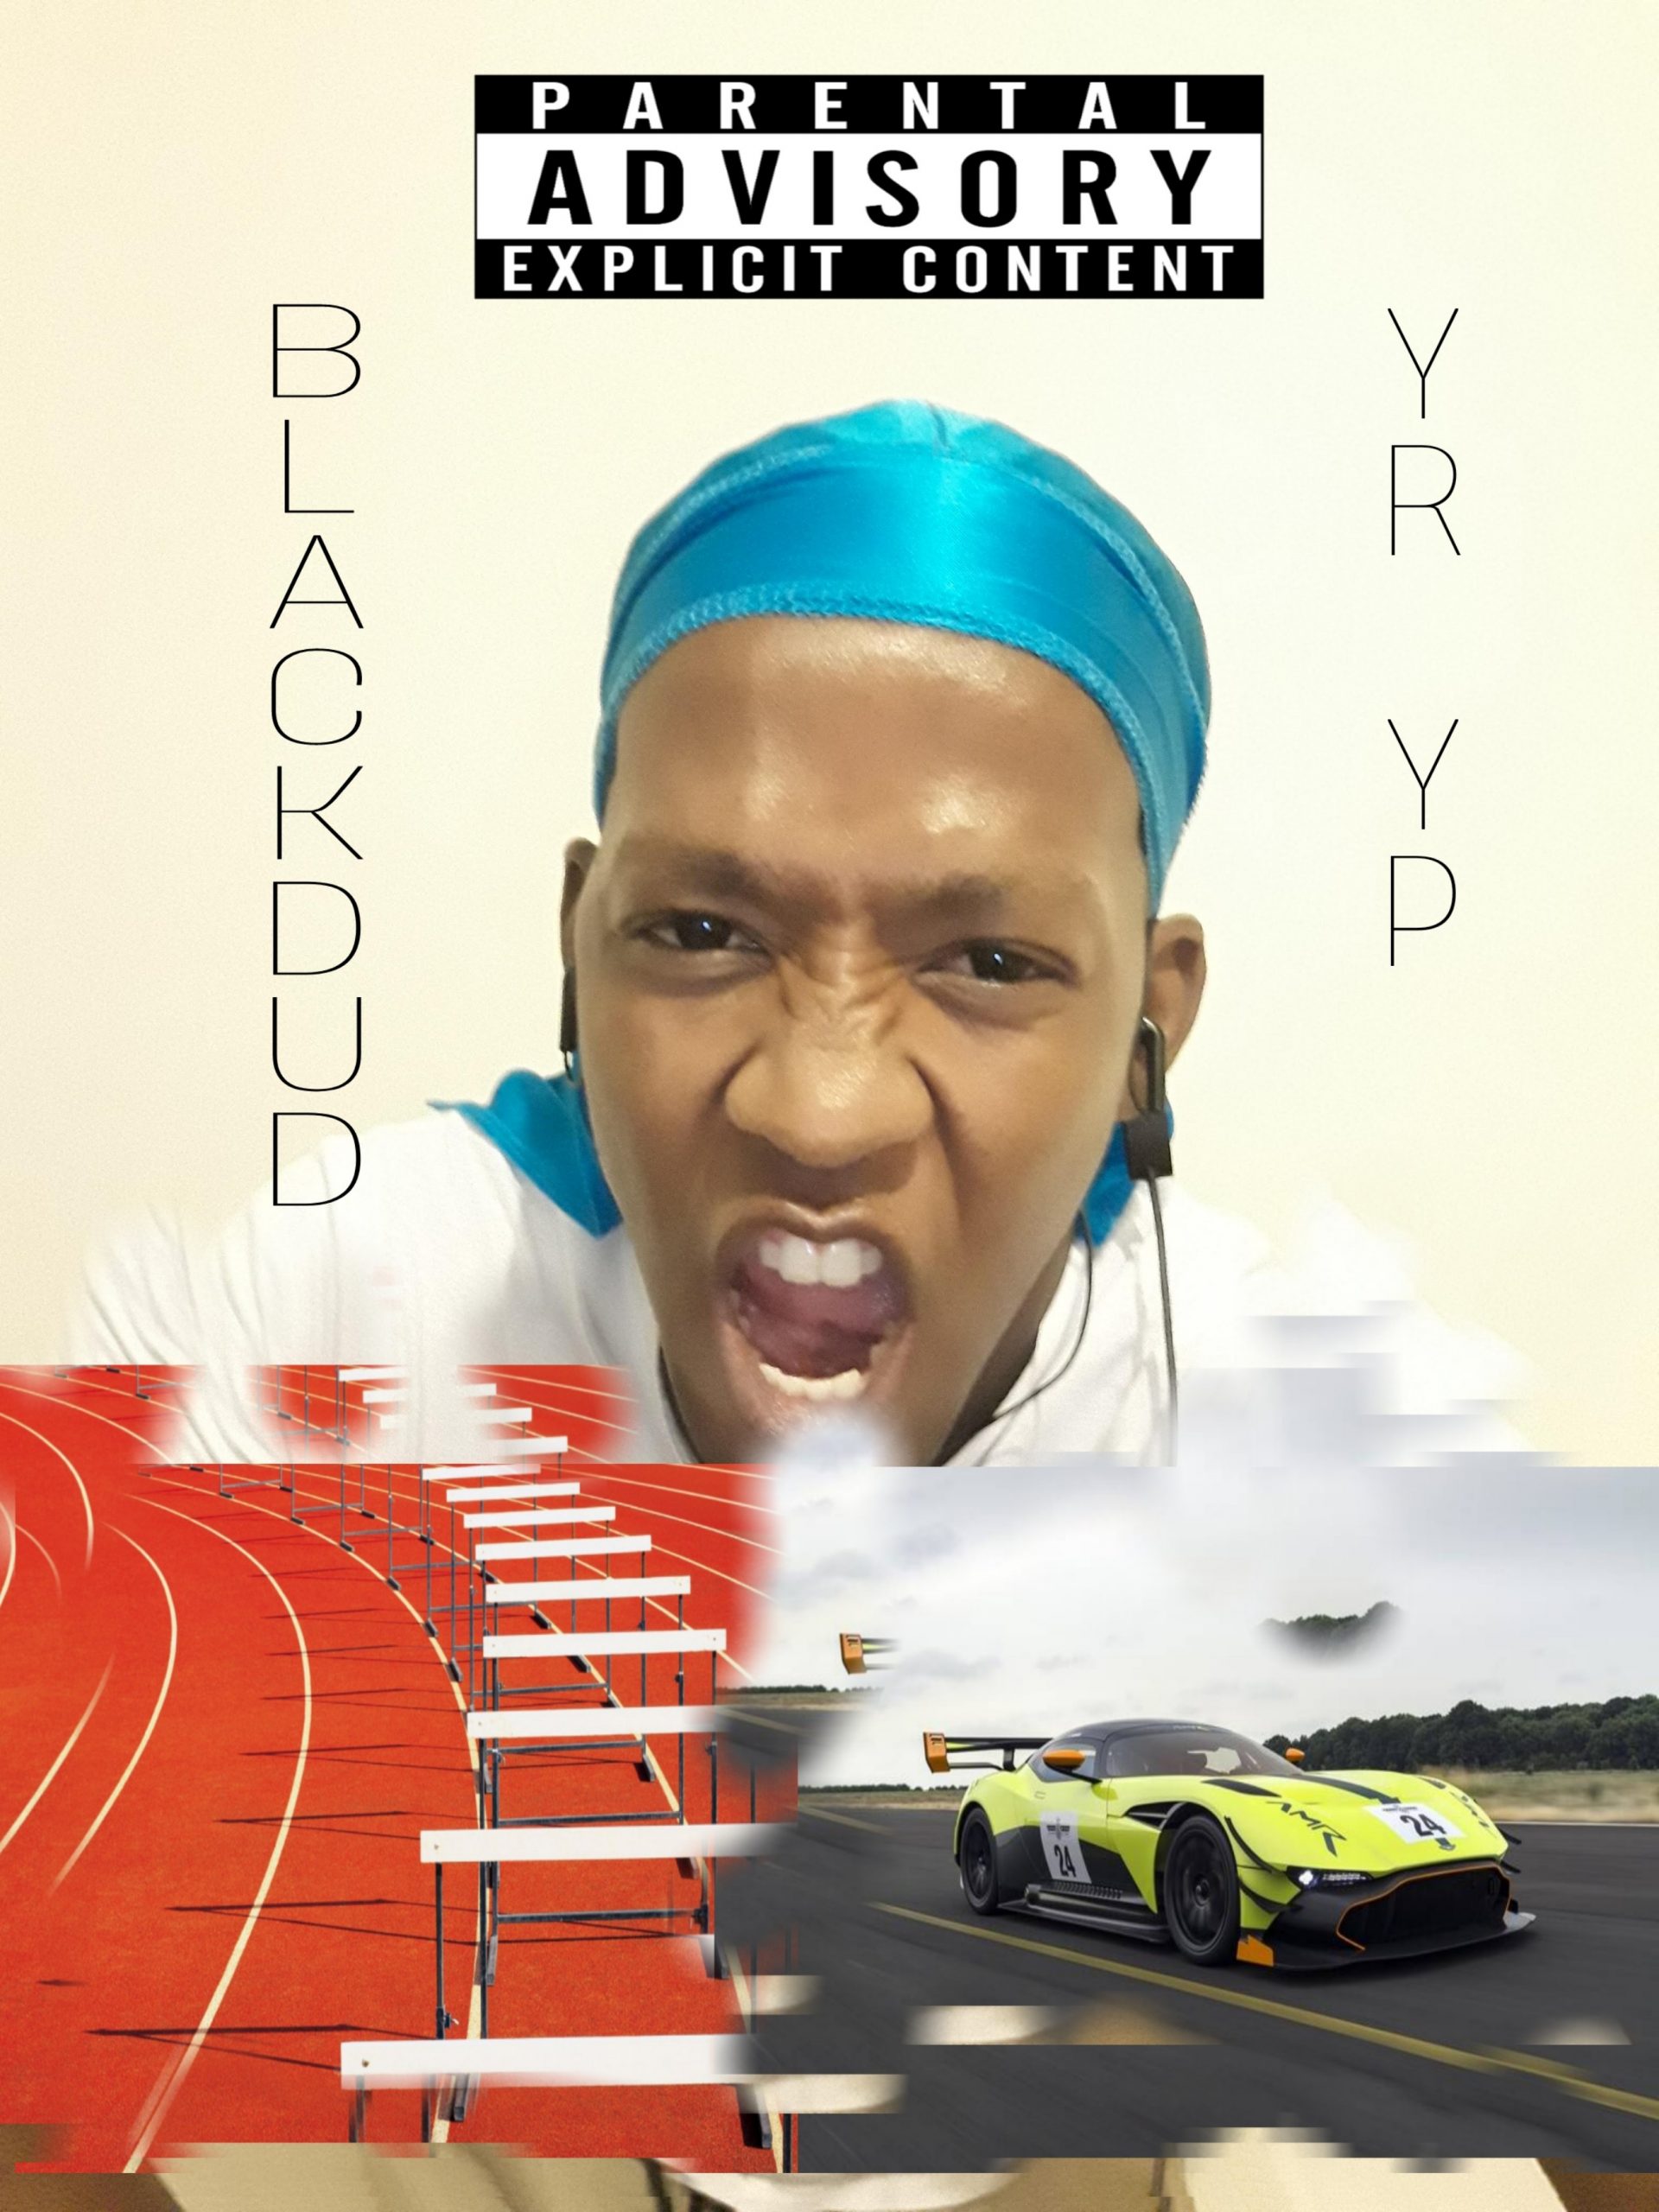 New on the Bafana FM Playlist: Hip Hop artist BLACKDUD releases hot new single YR YP (Your Race, Your Pace) feat Minnie.